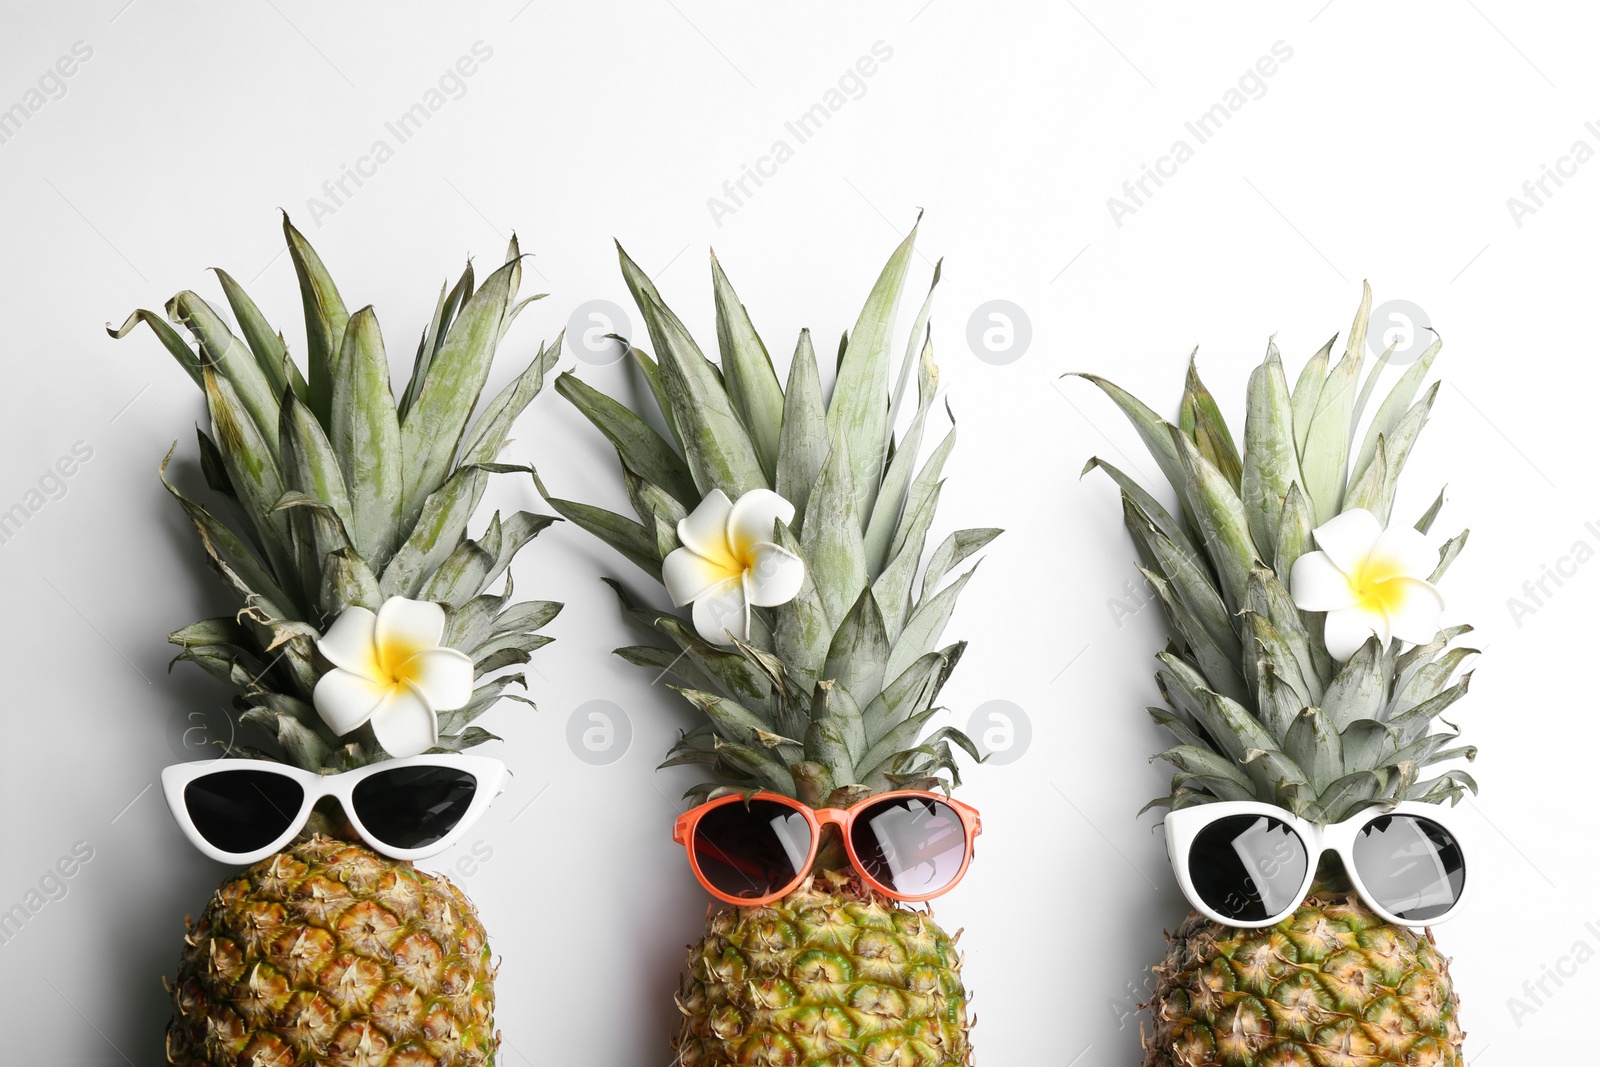 Photo of Pineapples with sunglasses and plumeria flowers on white background, top view. Creative concept